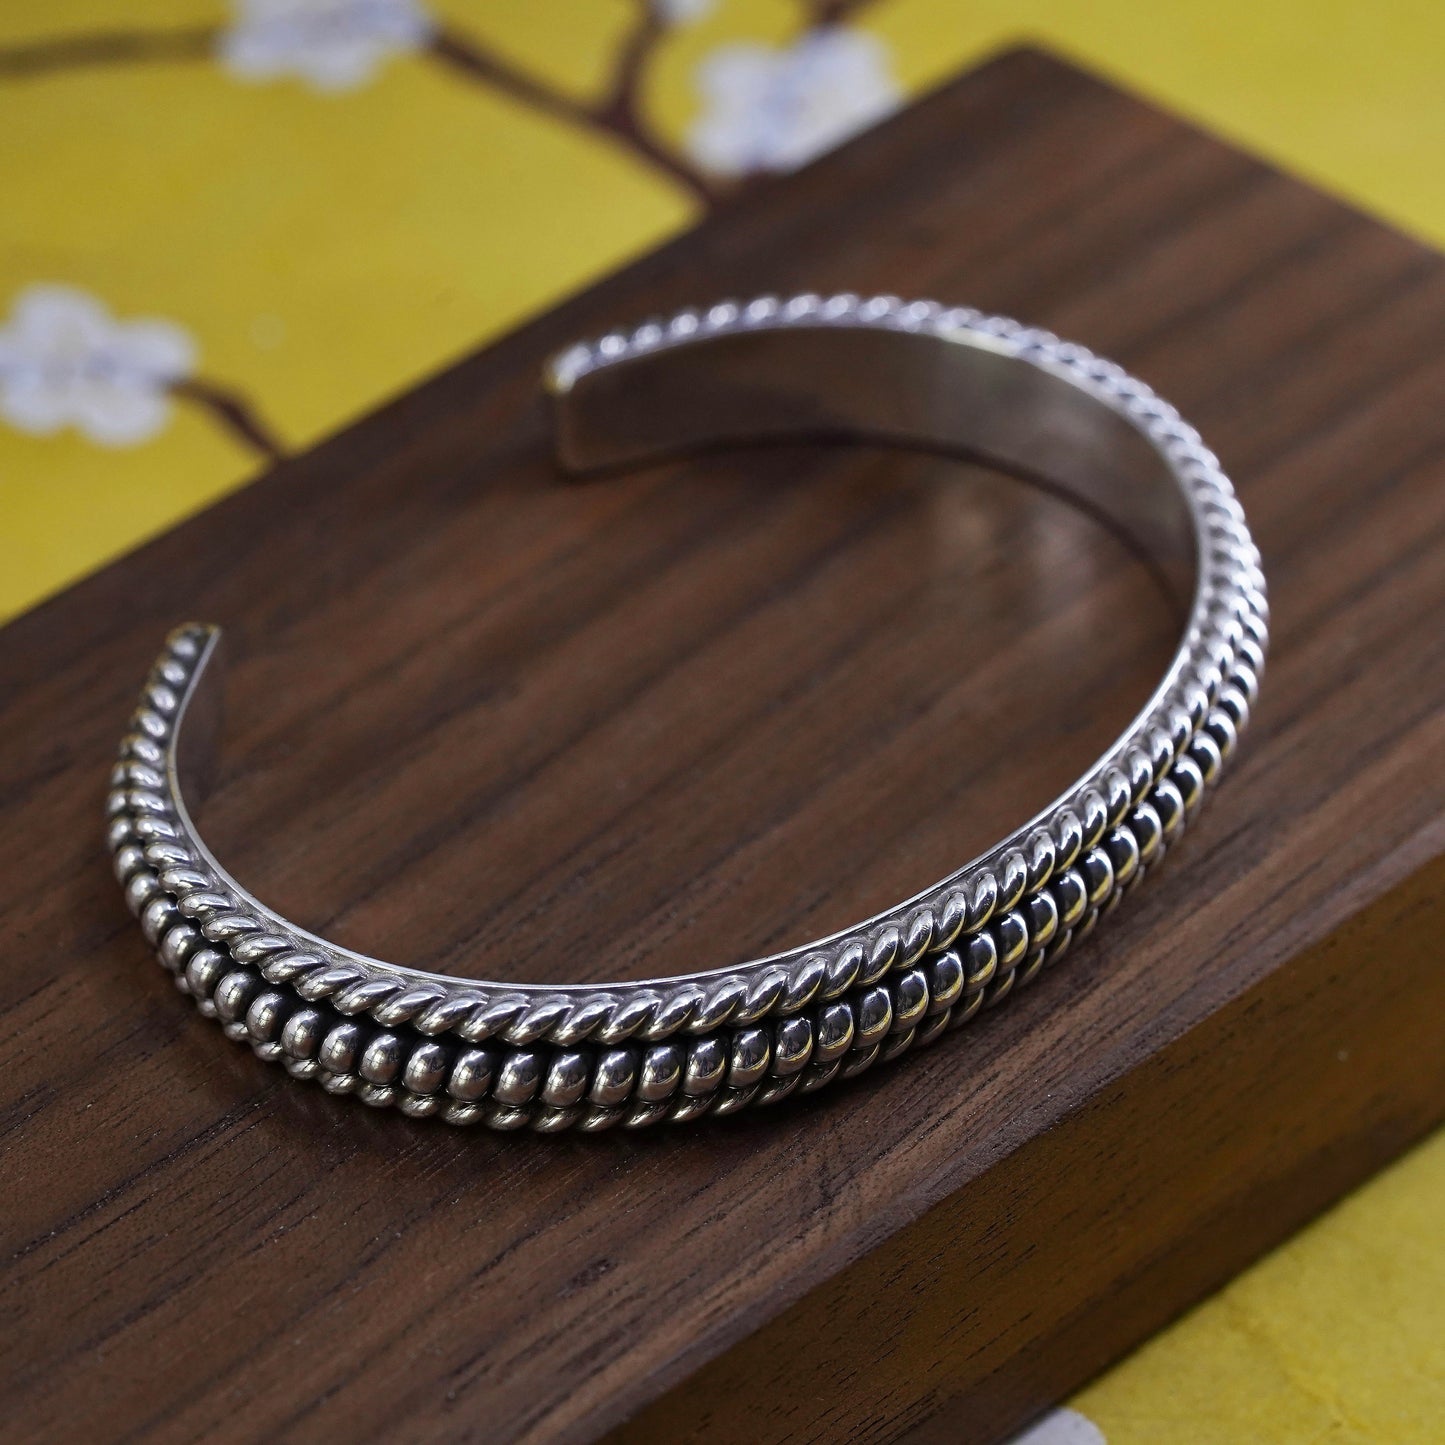 6.75", Vintage Sterling silver handmade bracelet, 925 braided woven cable cuff